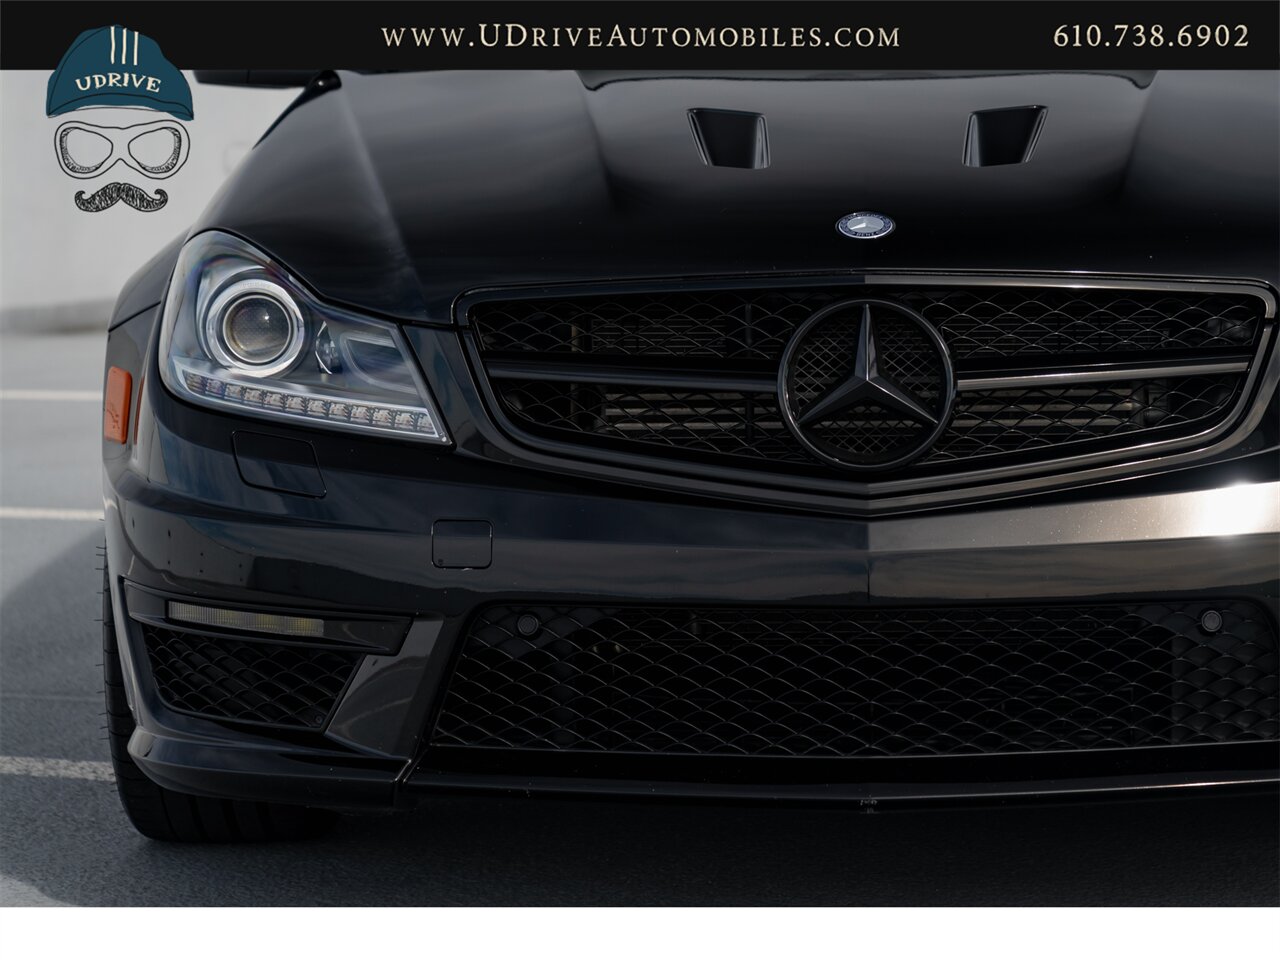 2015 Mercedes-Benz C63 AMG  Edition 507 17k Miles Pano Sunroof Locking Diff 507hp - Photo 14 - West Chester, PA 19382